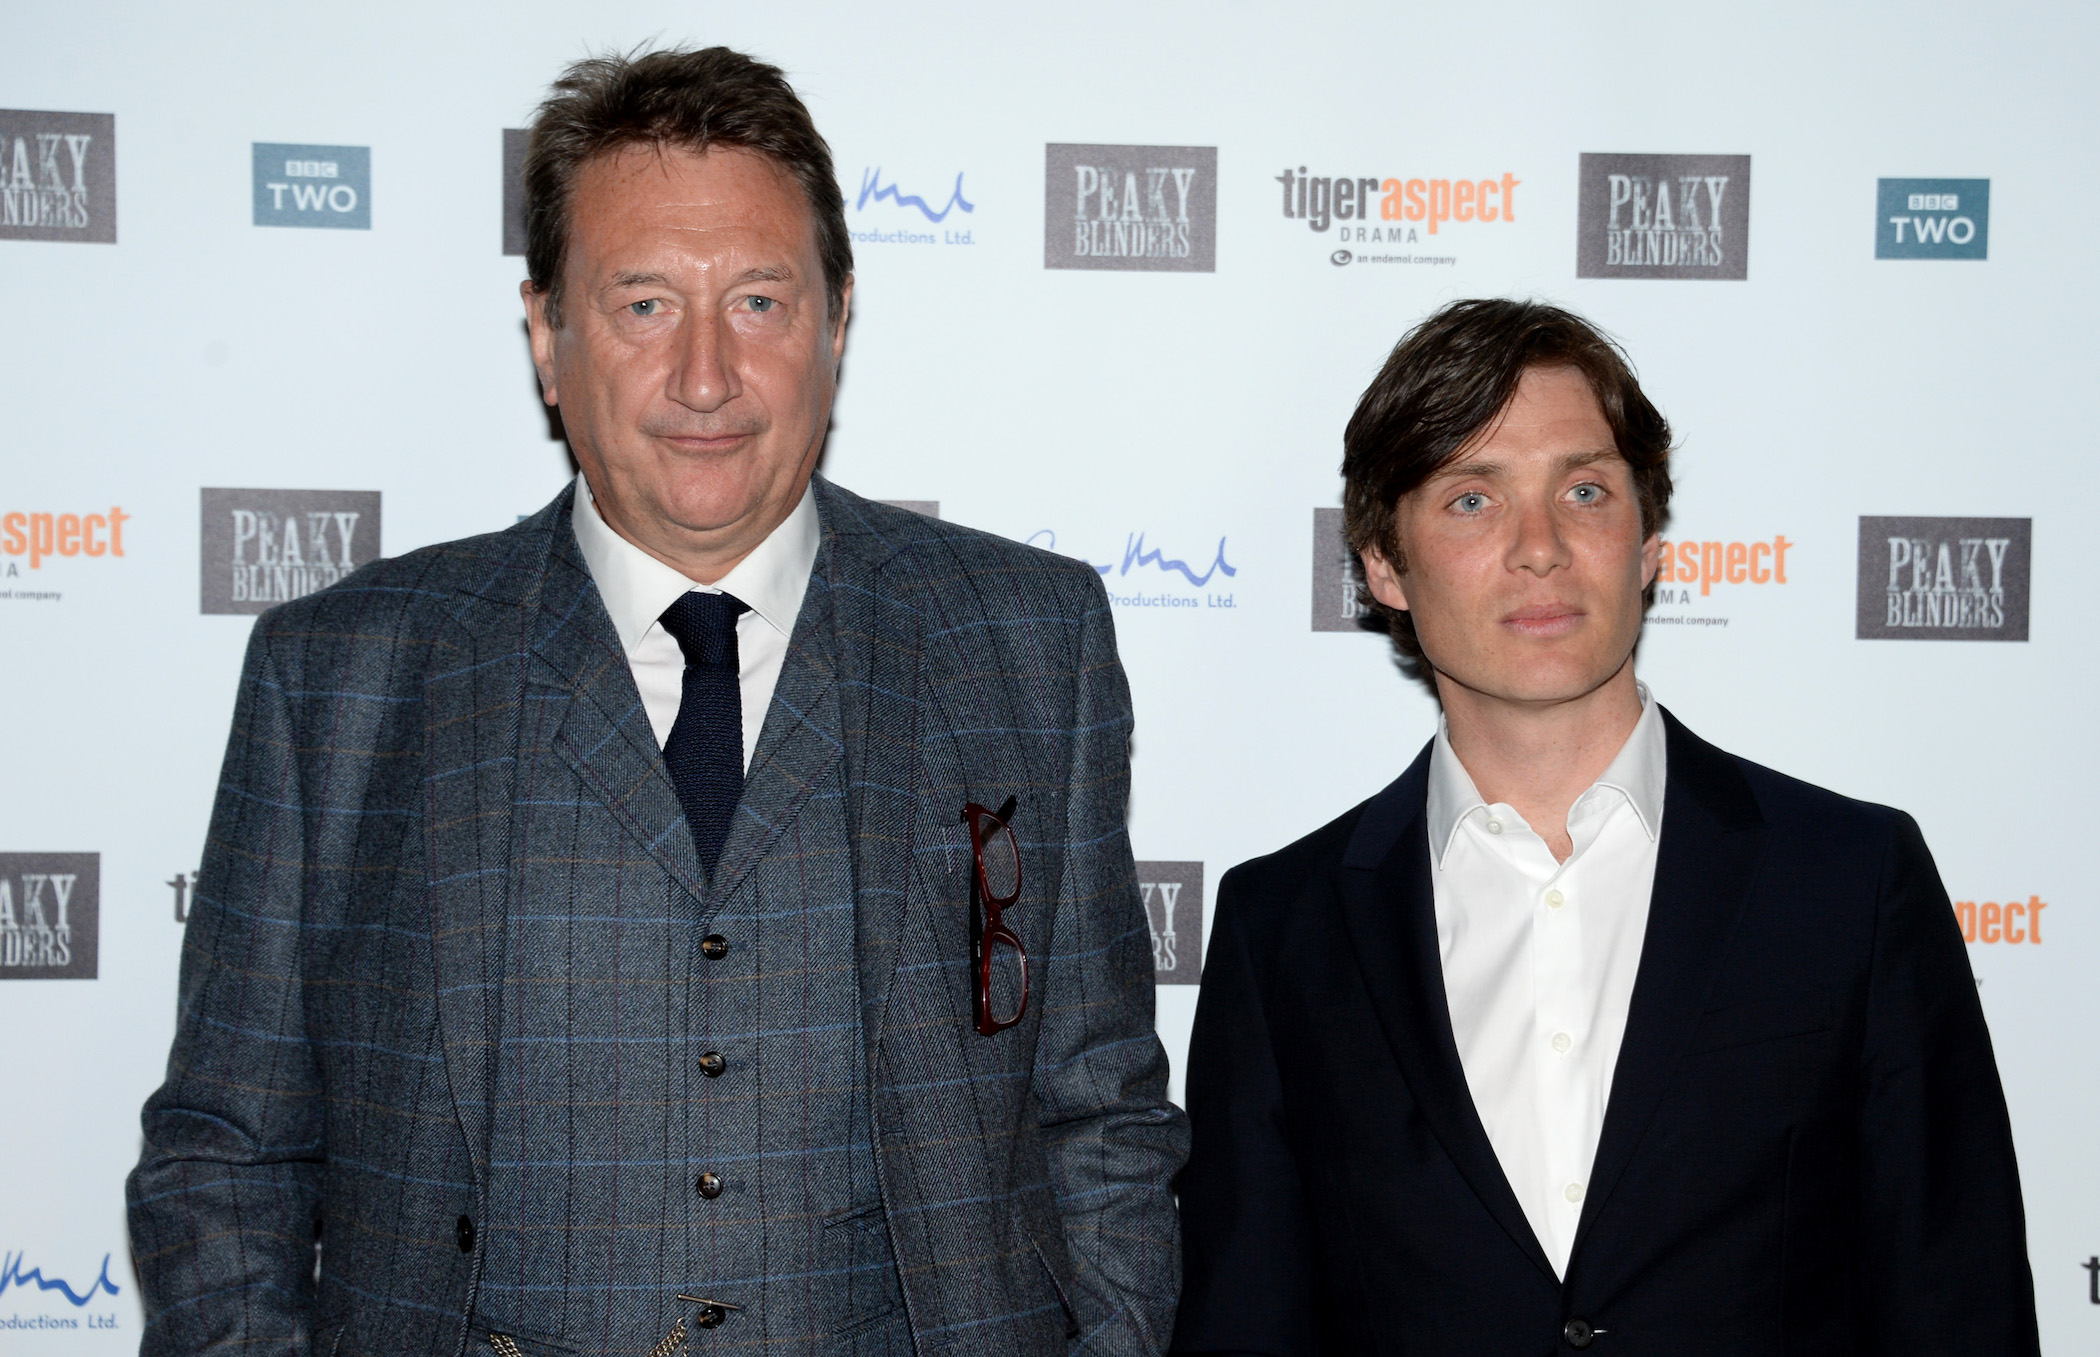 Steven Knight and Cillian Murphy from 'Peaky Blinders' Season 6 standing next to each other